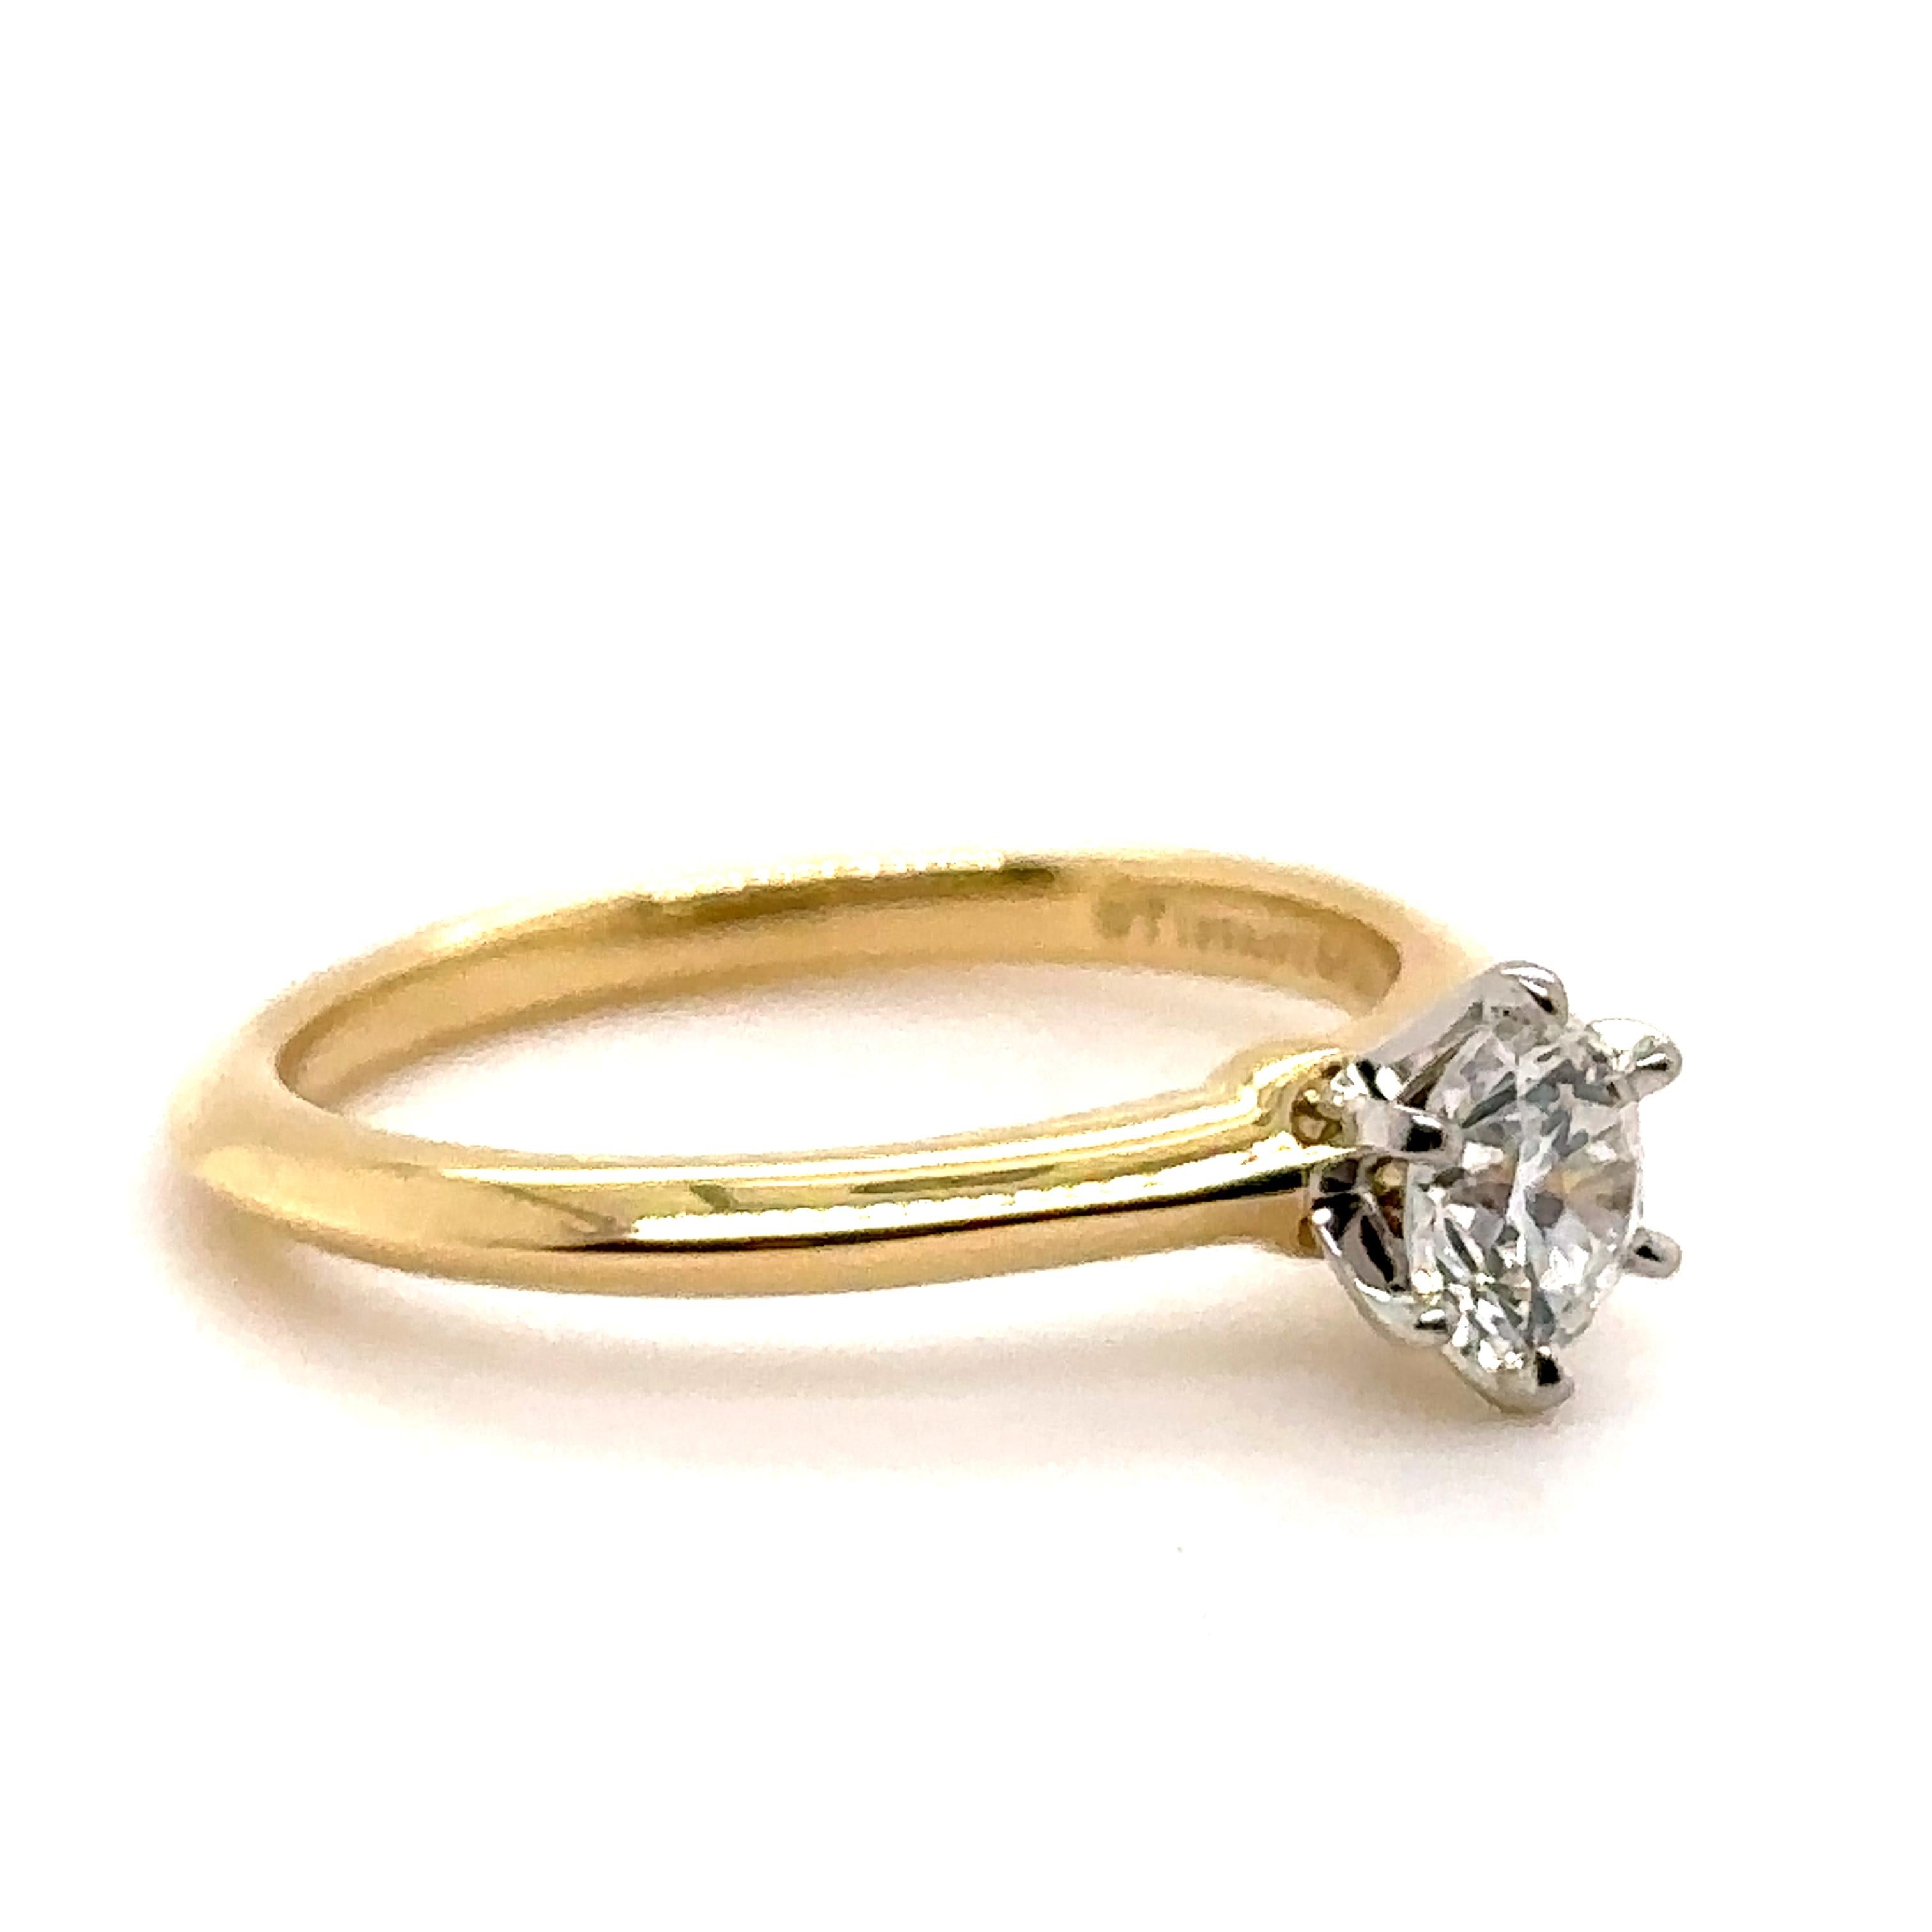 A ladies, Tiffany & Co, diamond engagement Ring

Diamond engagement ring. Made of 18 kt Yellow Gold and Platinum, weighing 3.05 gm. Stamped: Tiffany & Co. Au 750 Pt 950 68740088.

Set with a Round, brilliant cut Diamond, colour I, and clarity VS1.